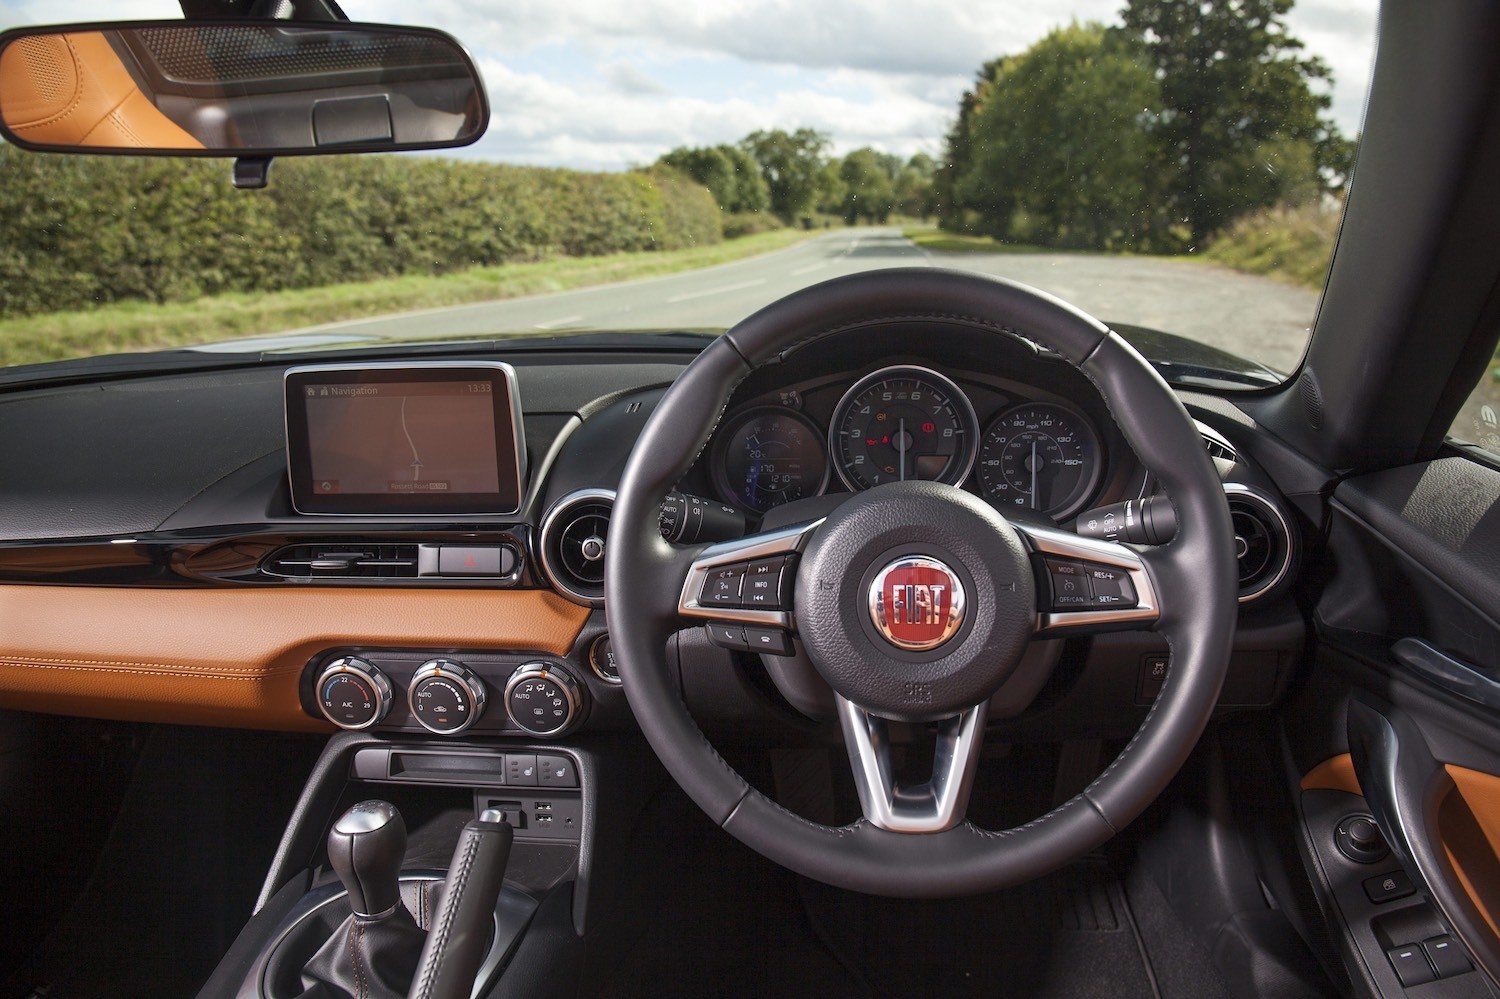 Neil Lyndon reviews the Fiat 124 Spider Lusso Plus for Drive 7